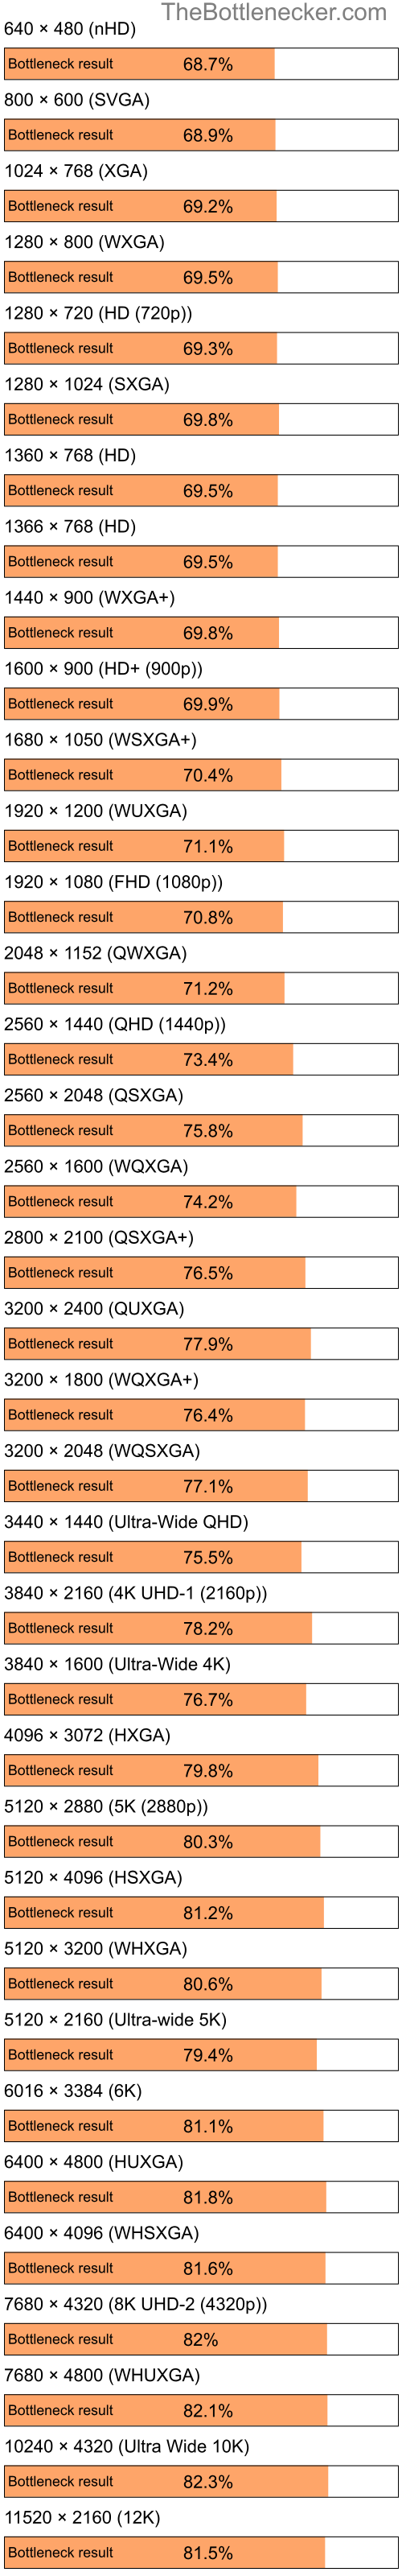 Bottleneck results by resolution for Intel Celeron M 420 and AMD Radeon HD 4200 in Graphic Card Intense Tasks